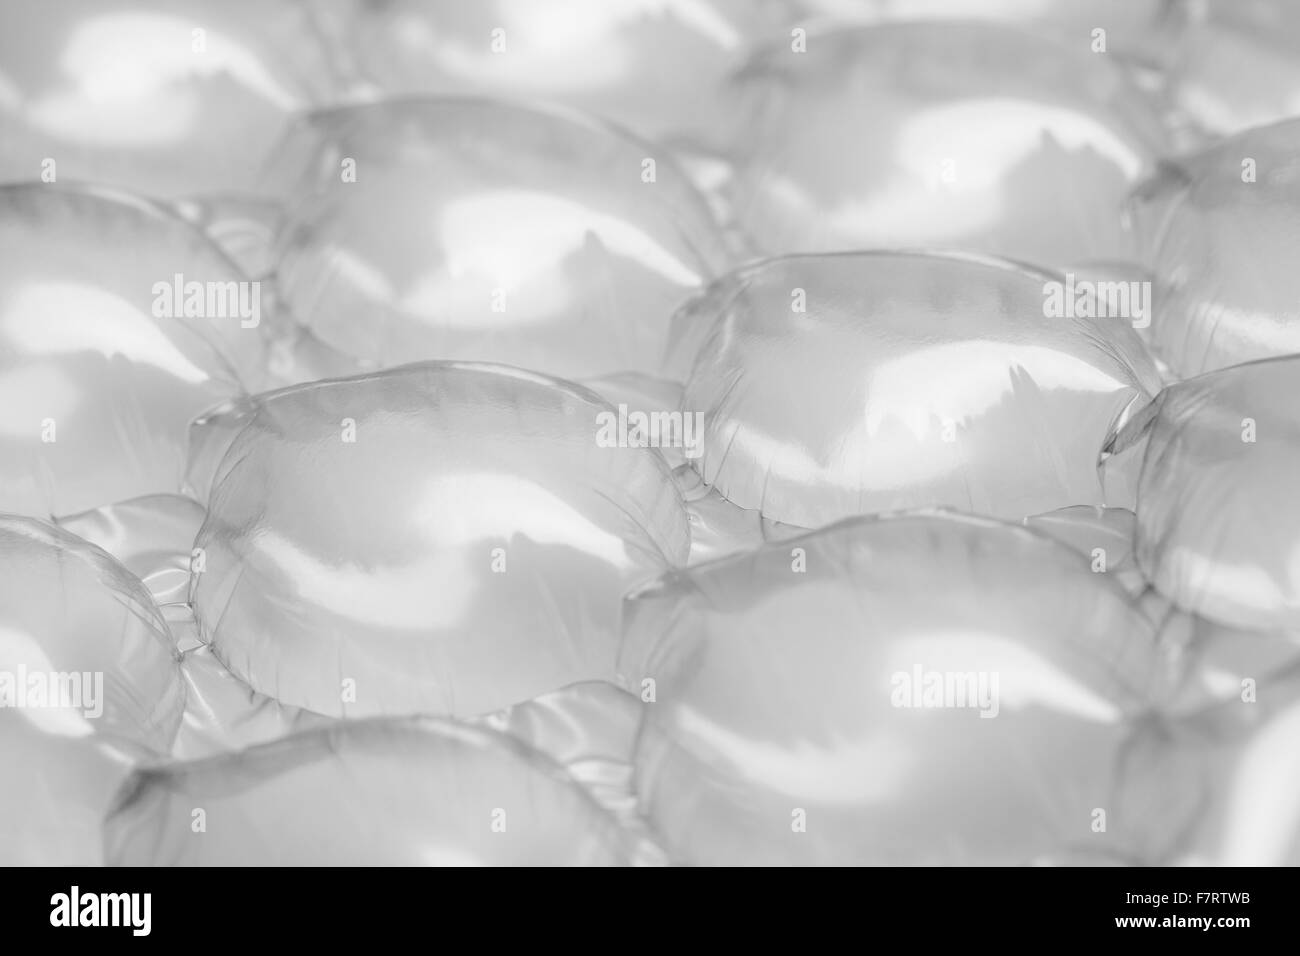 Clear Large Plastic Bubble Wrap Packaging Closeup. Stock Photo